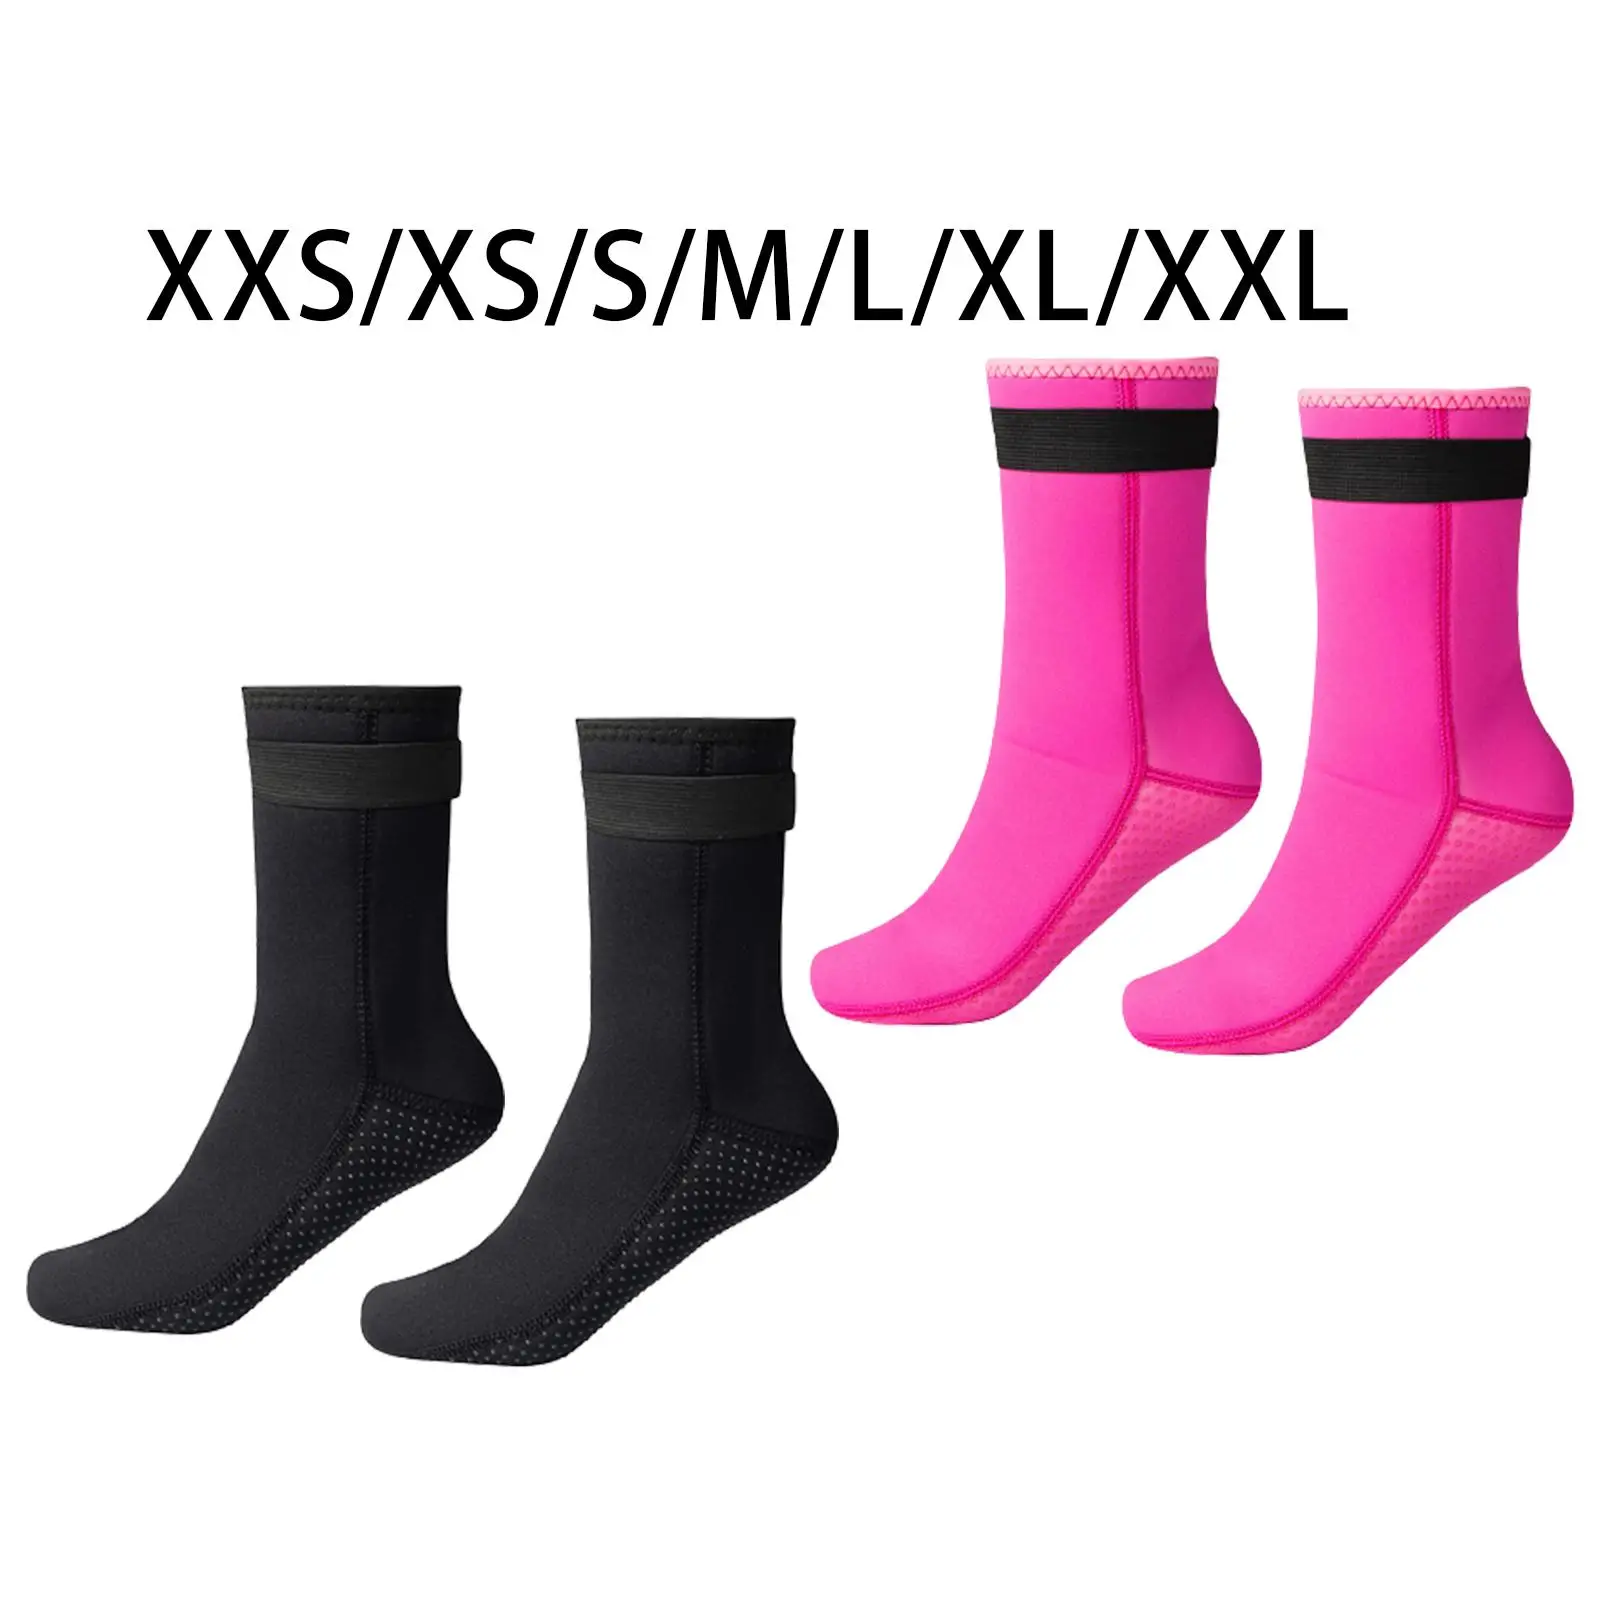 Neoprene Diving Socks Dive Boots Warm Surfing Sock Swimming Socks for Paddling Sailing Rafting Water Sports Activities